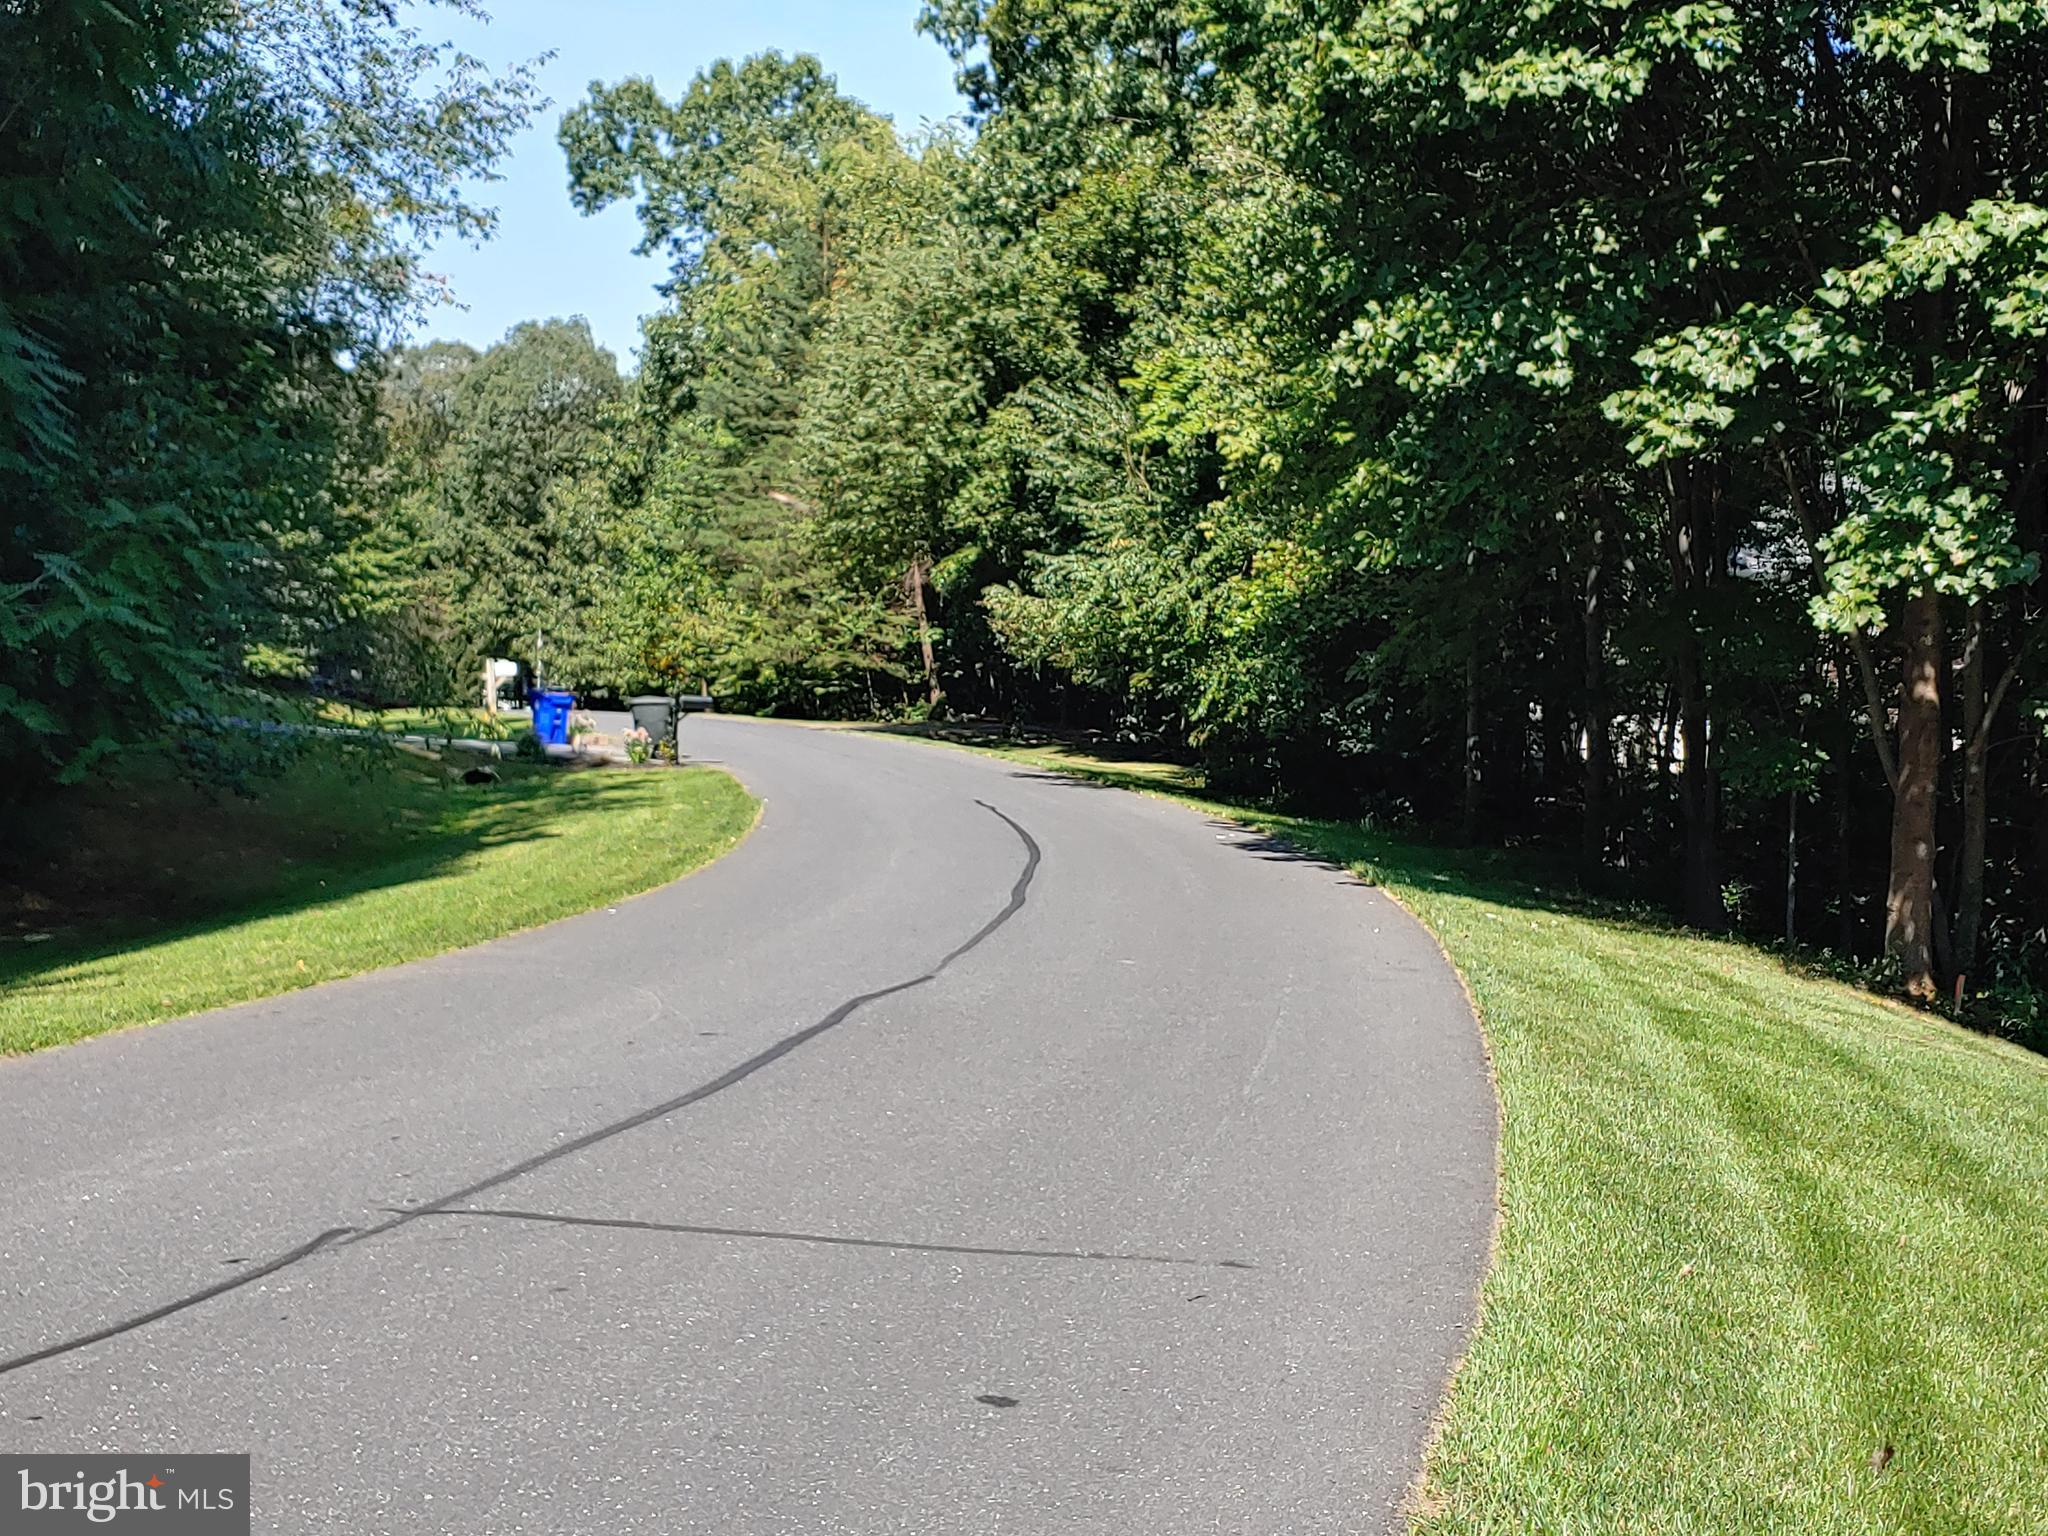 a view of a road with a yard